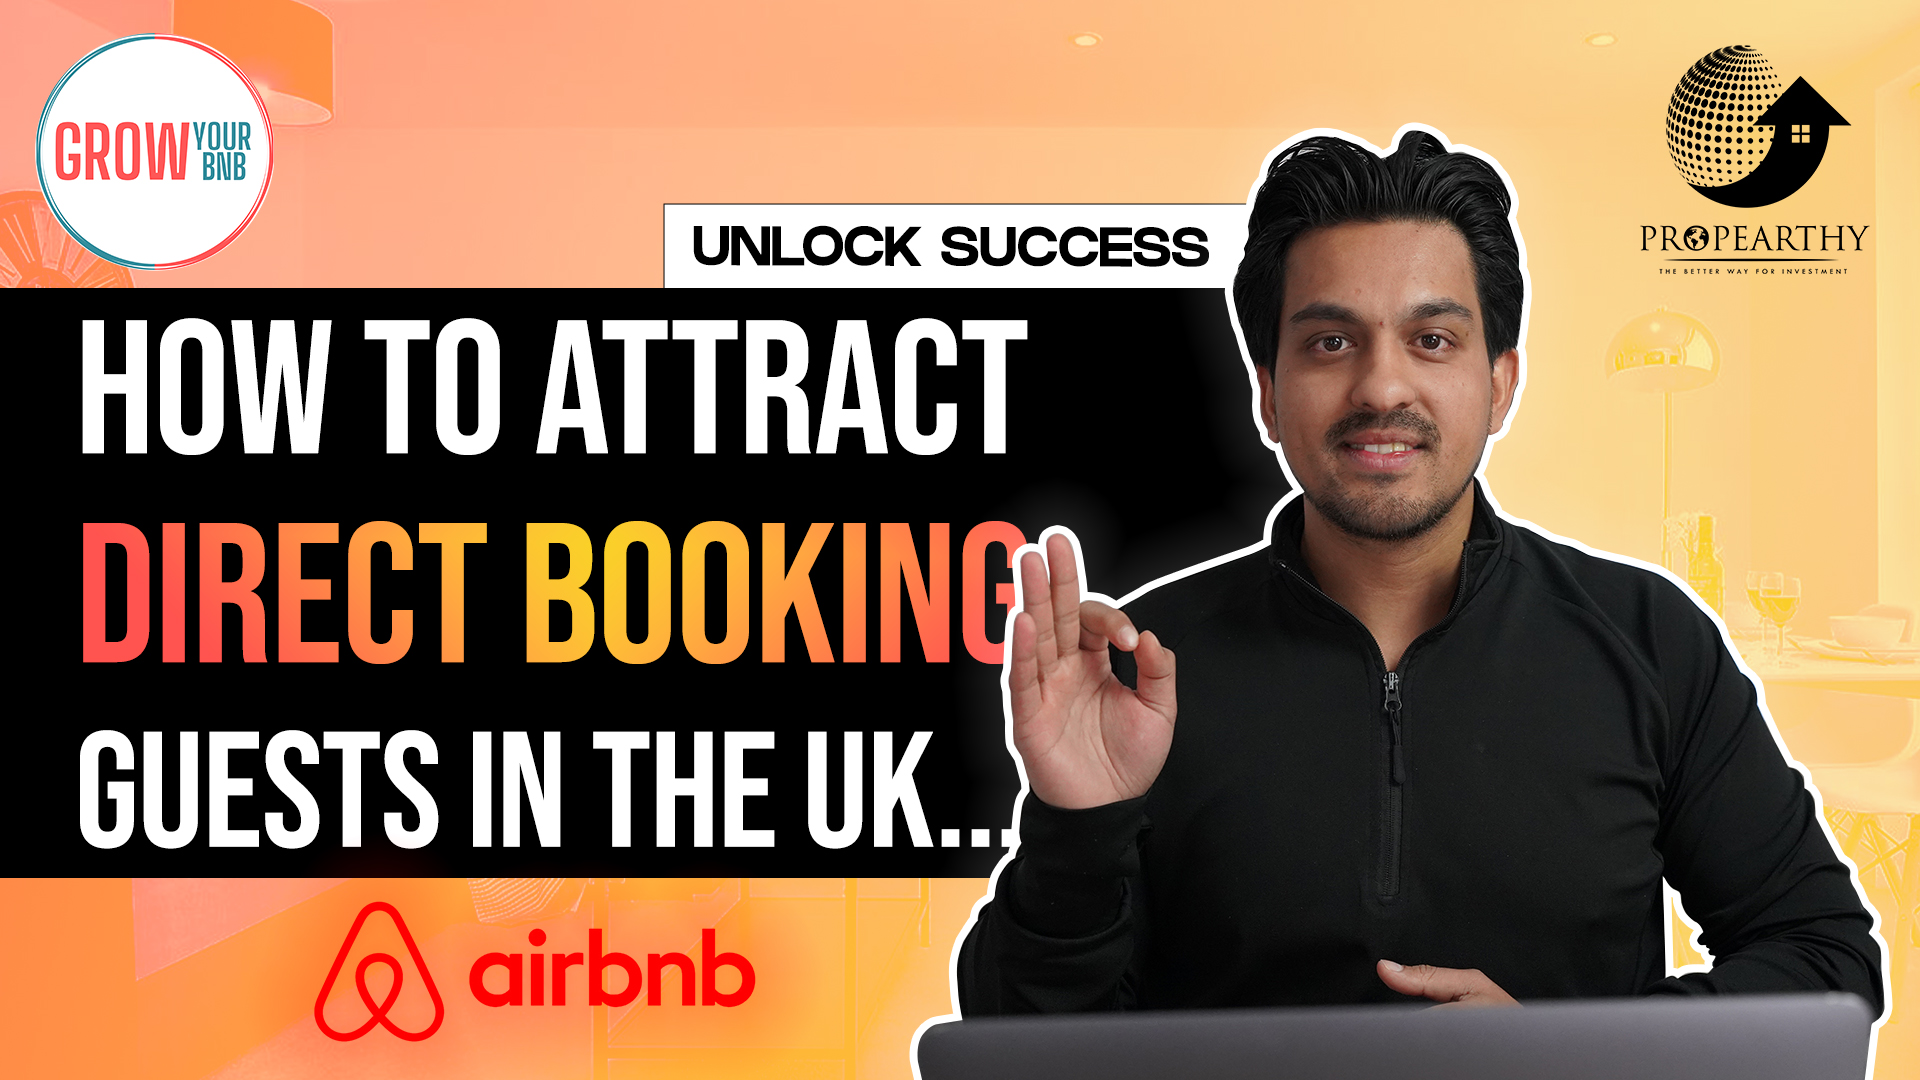 How to Attract Direct Booking Guests in the UK GrowYourBnb